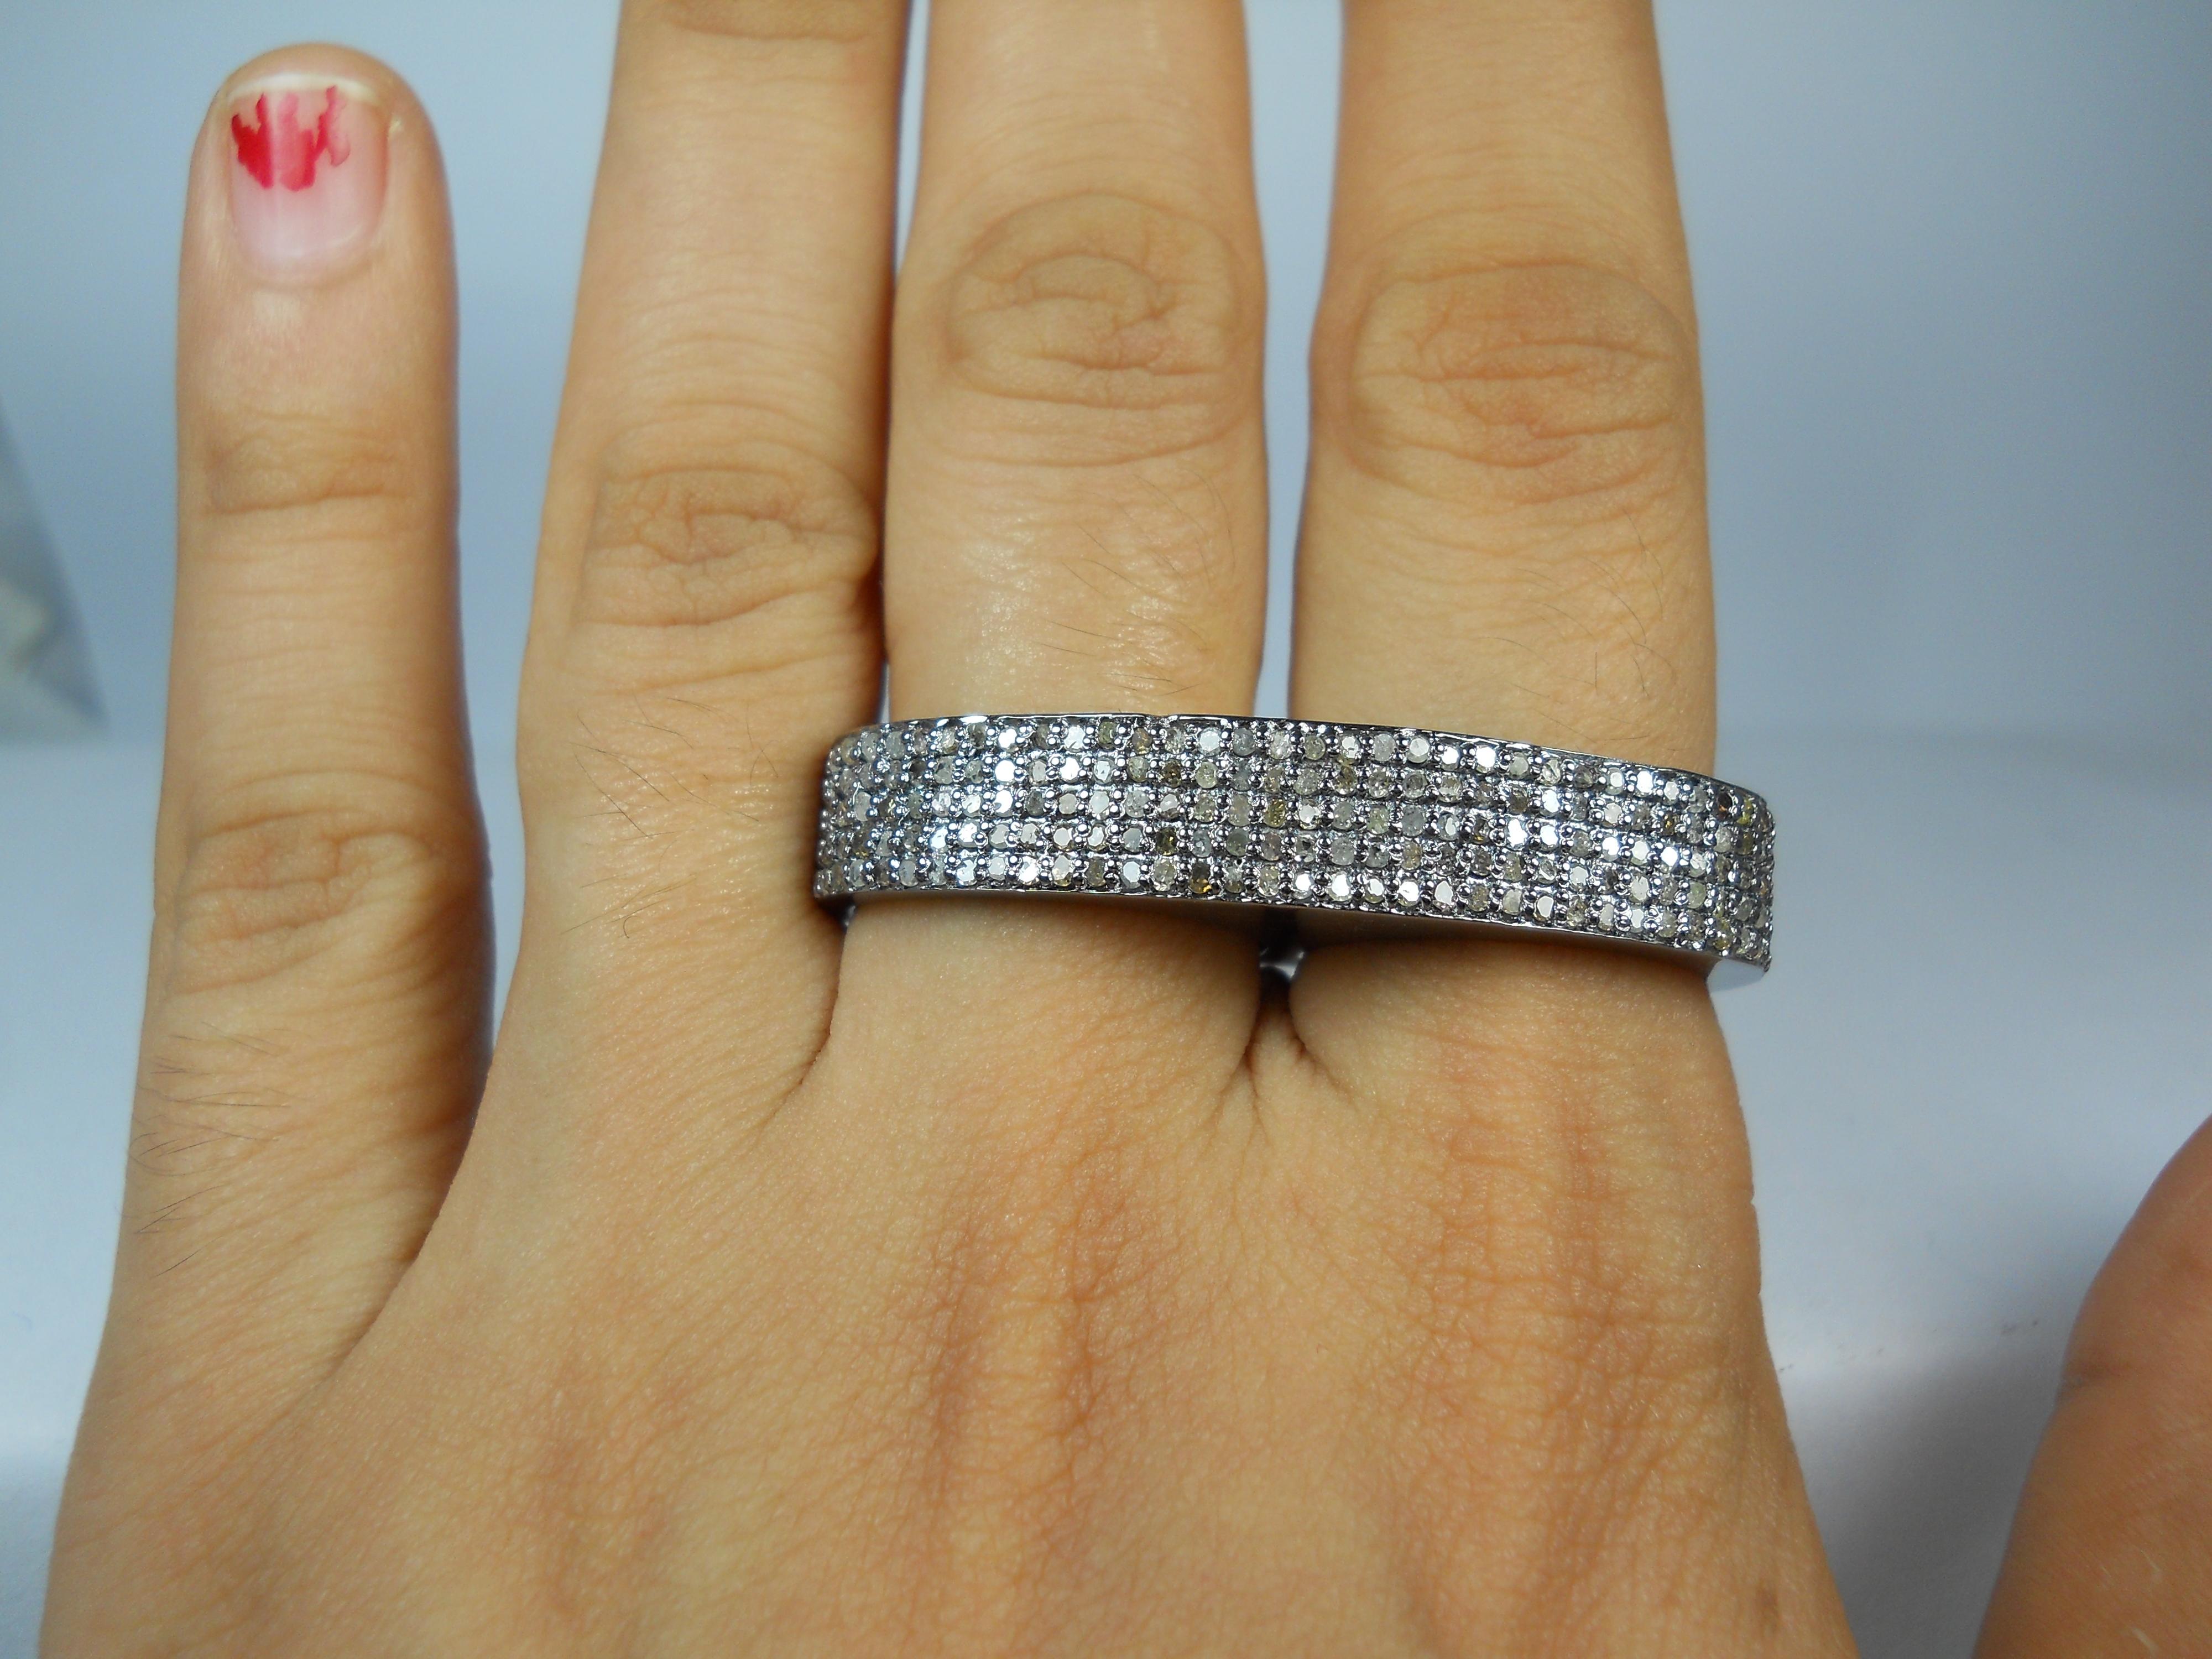 This beautiful two finger ring with natural diamonds consists of:
Diamond= natural pave diamonds
Diamond weight- 1.90cts
Diamond color- white with a tint of grey
Metal- Silver
Purity- 925 (sterling silver)
Metal color- oxidized silver look